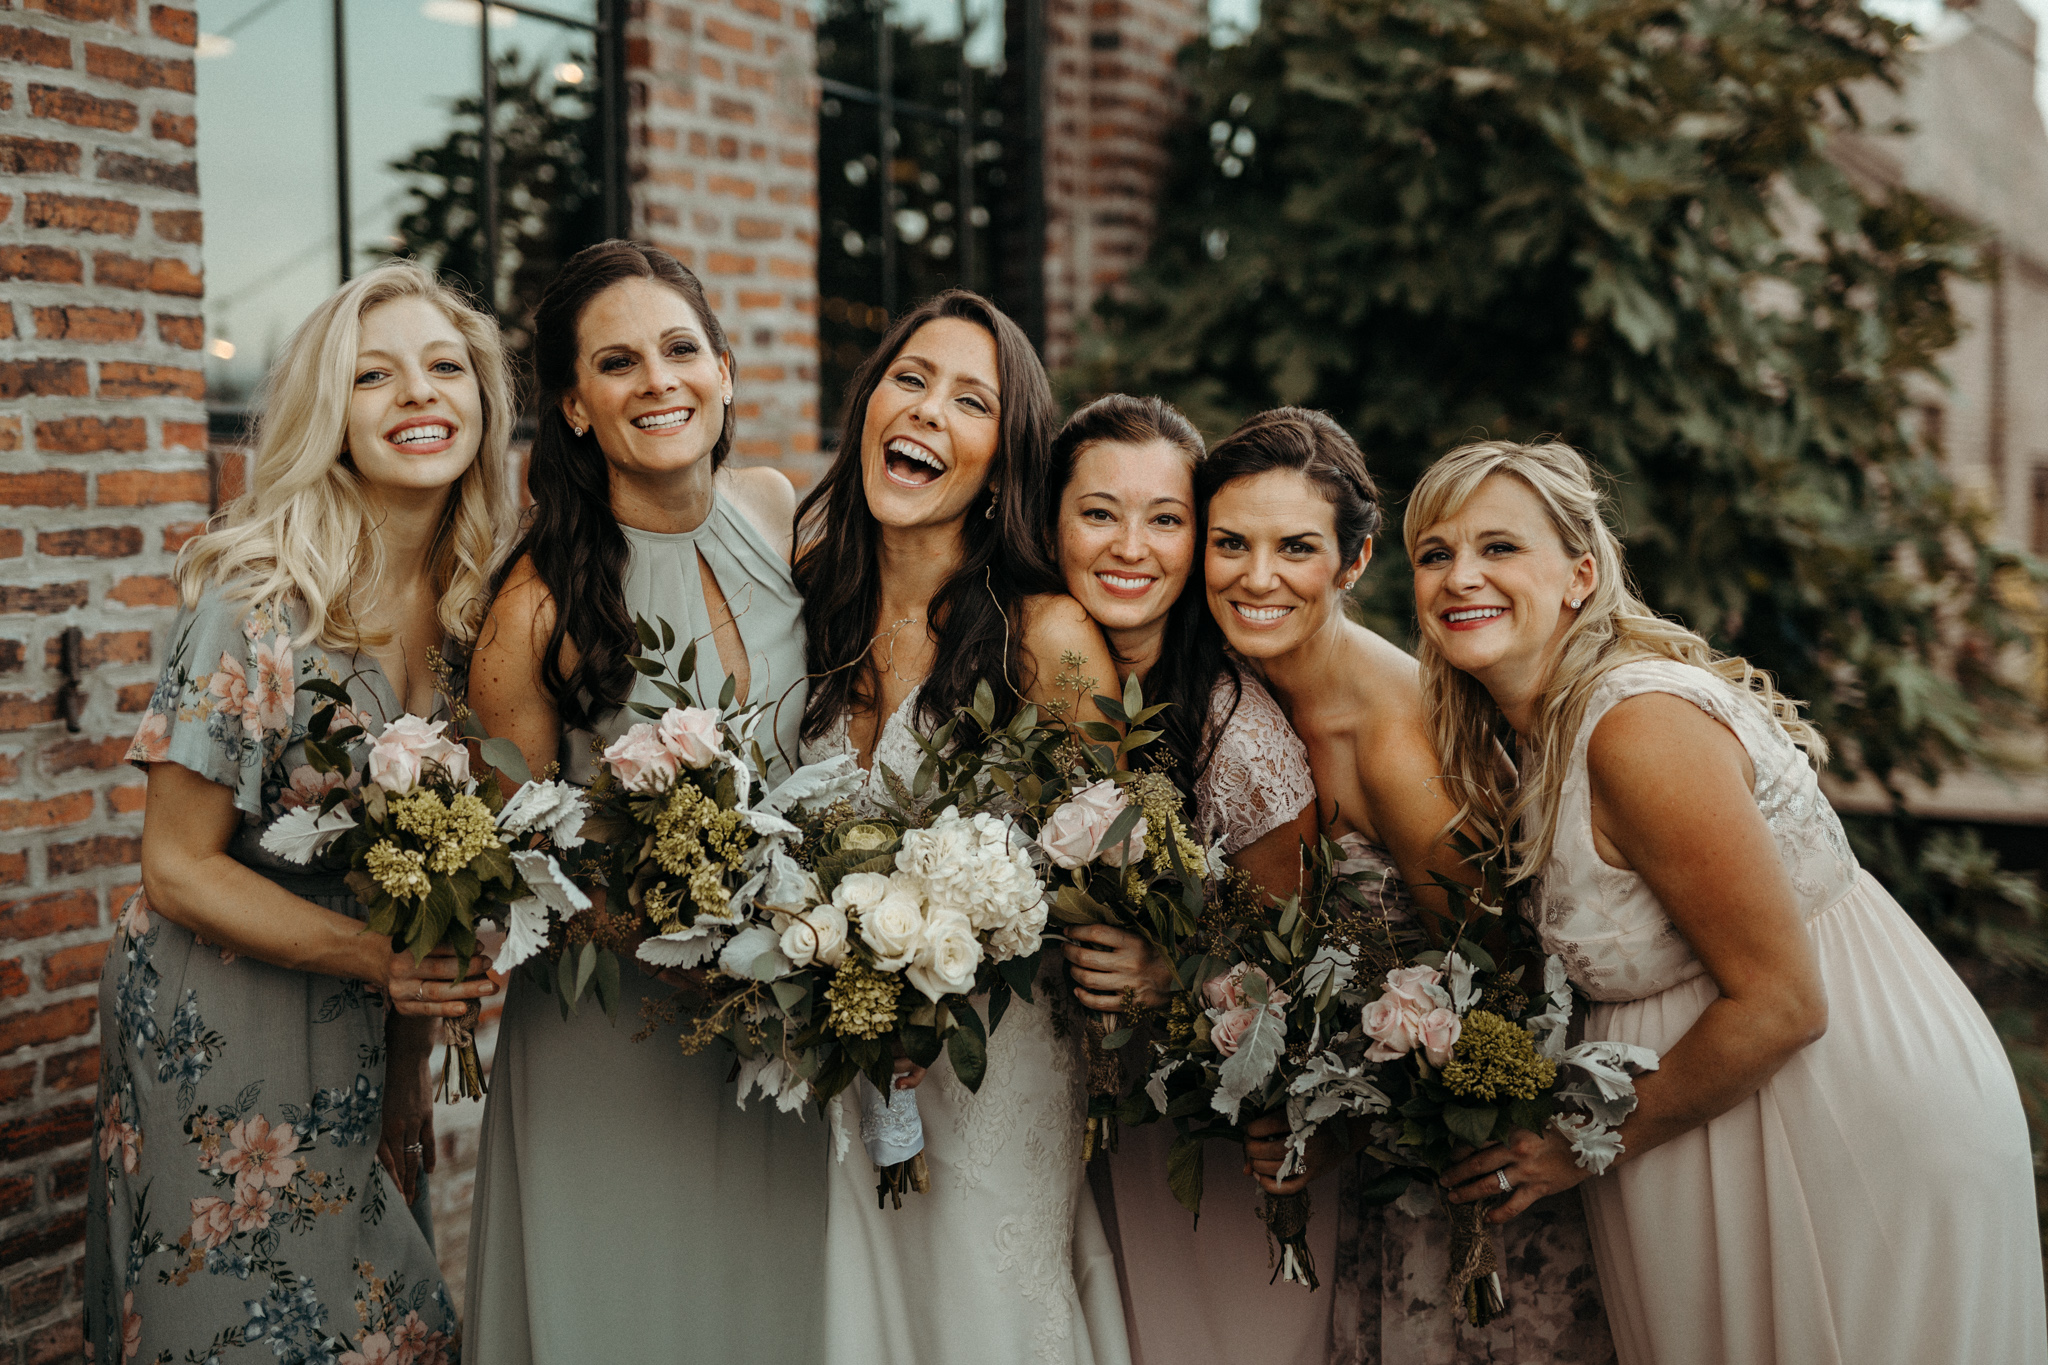 Unique Industrial Chic Baltimore Wedding at Monument Brewing Co. with Food Trucks // Baltimore, Maryland // Victoria Selman Photographer